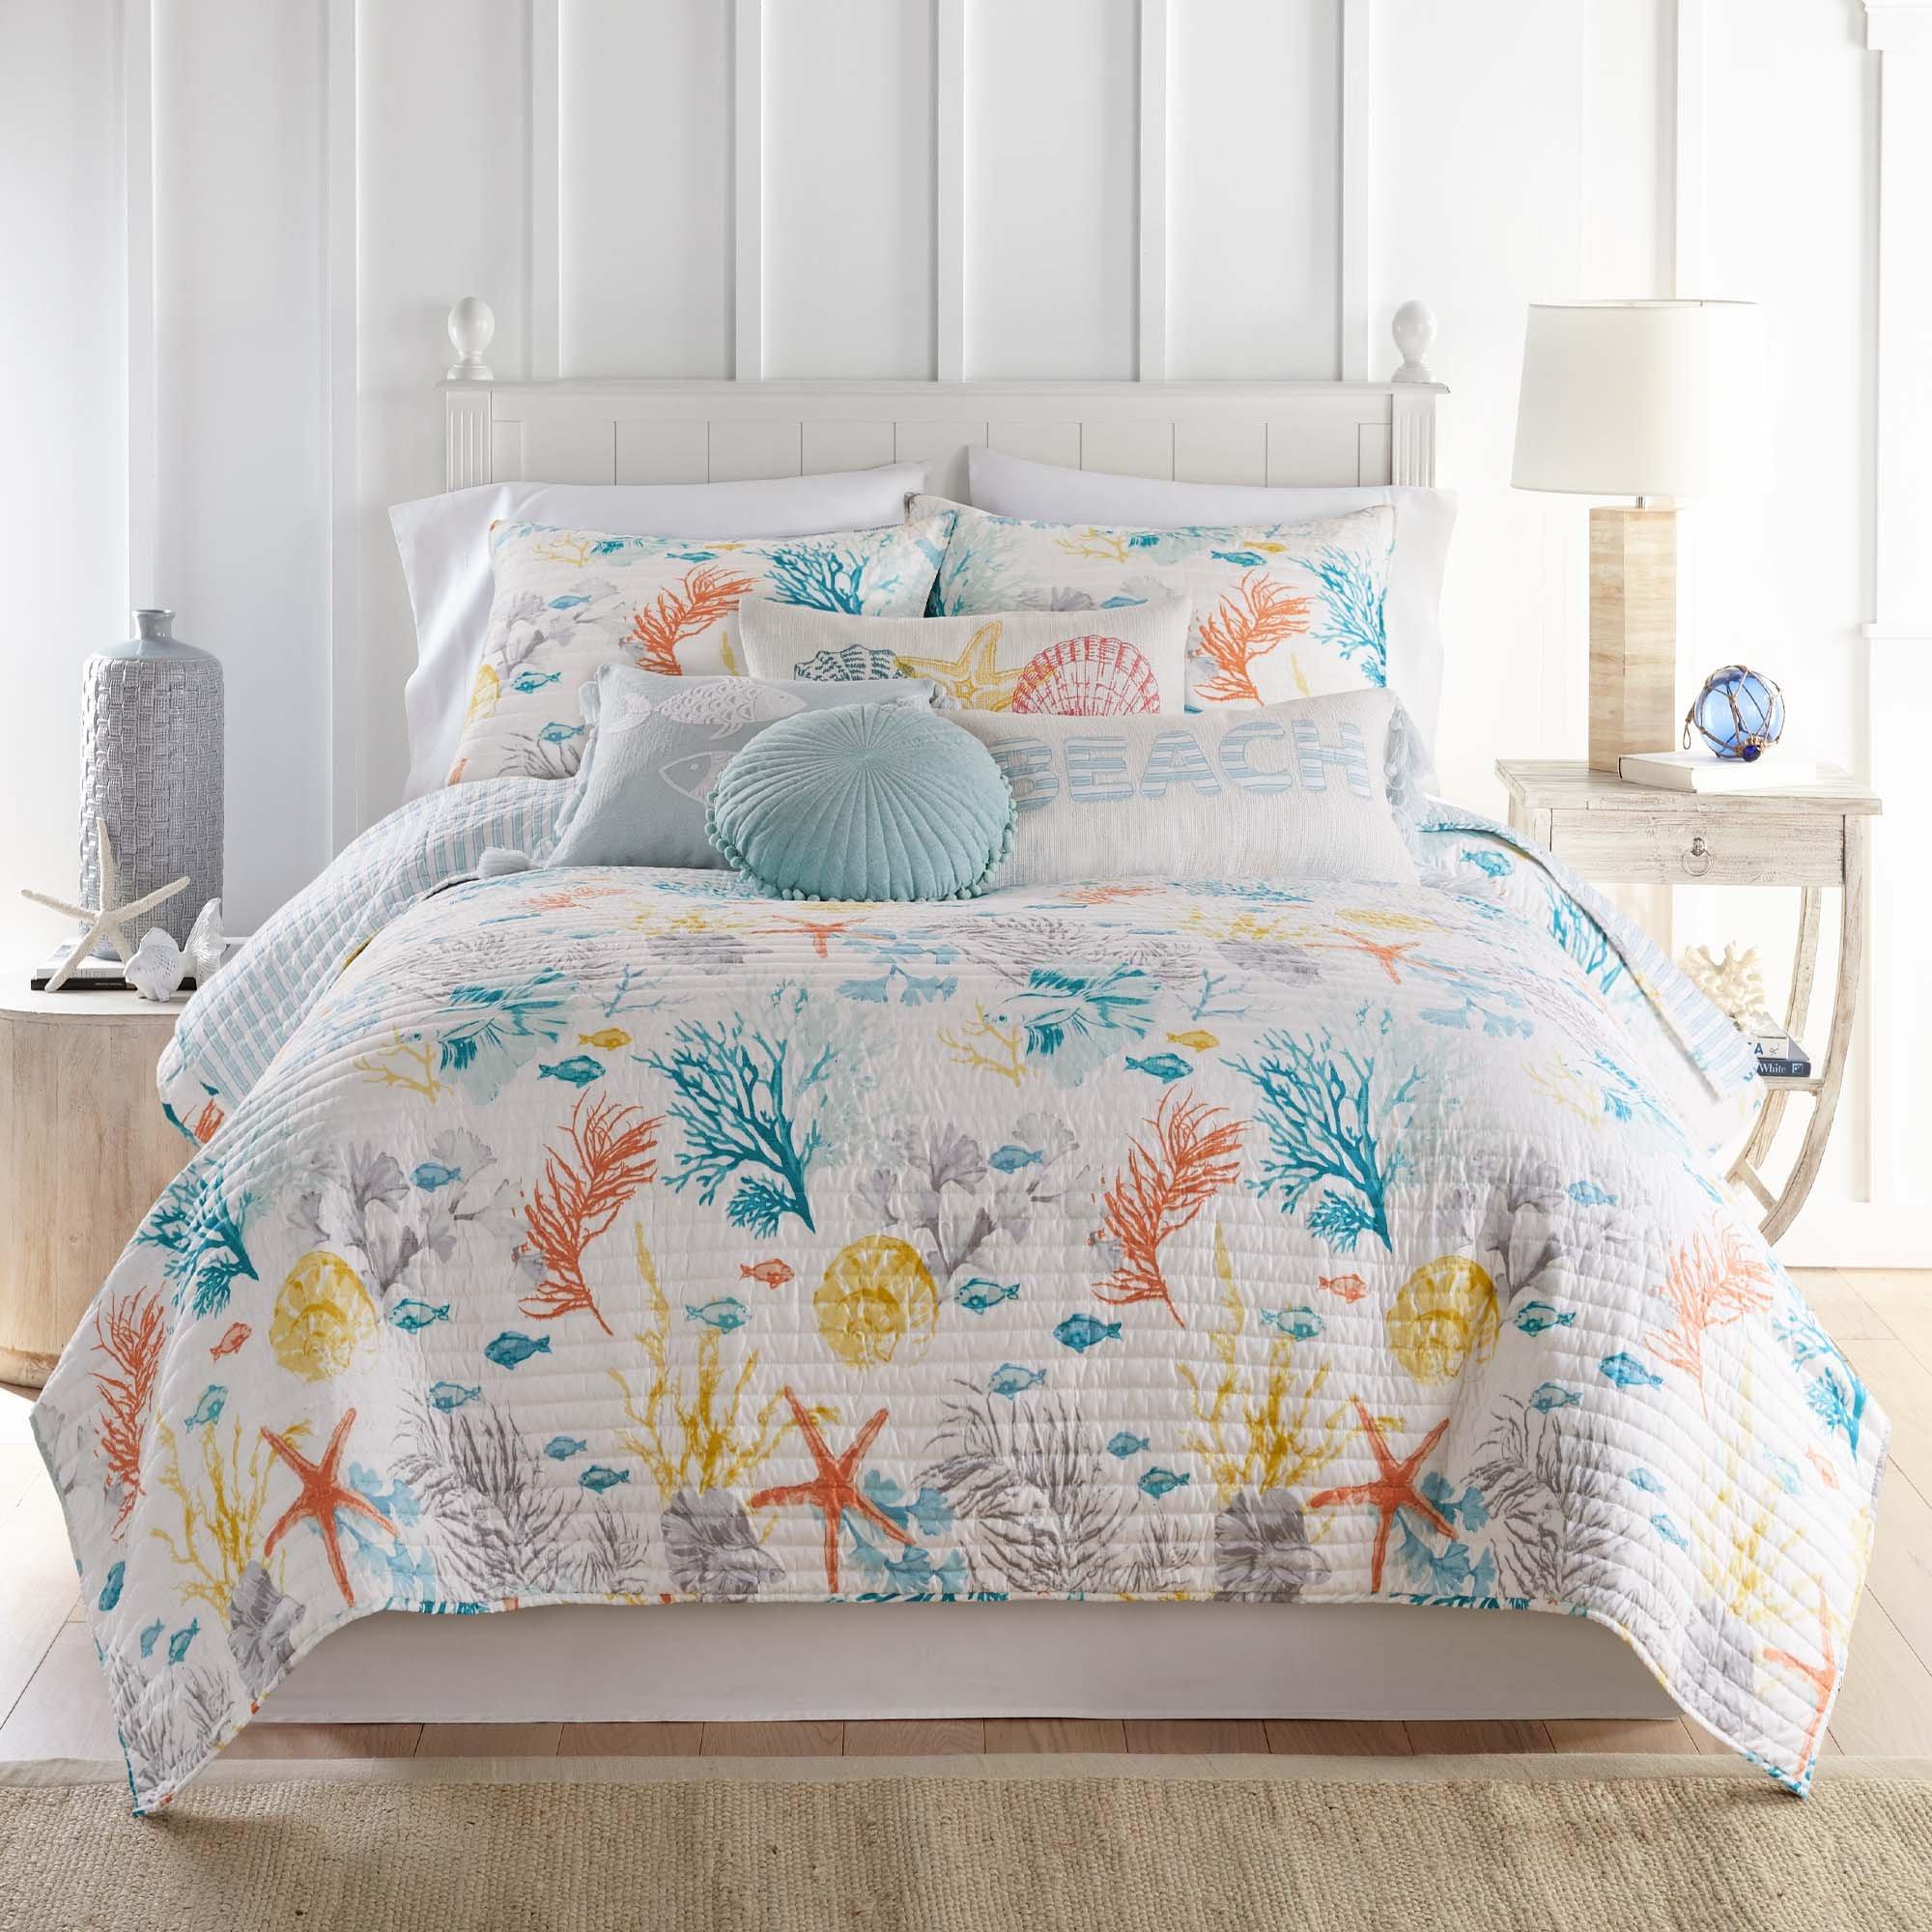 Whimsical Sea 3 Pc Quilt Set